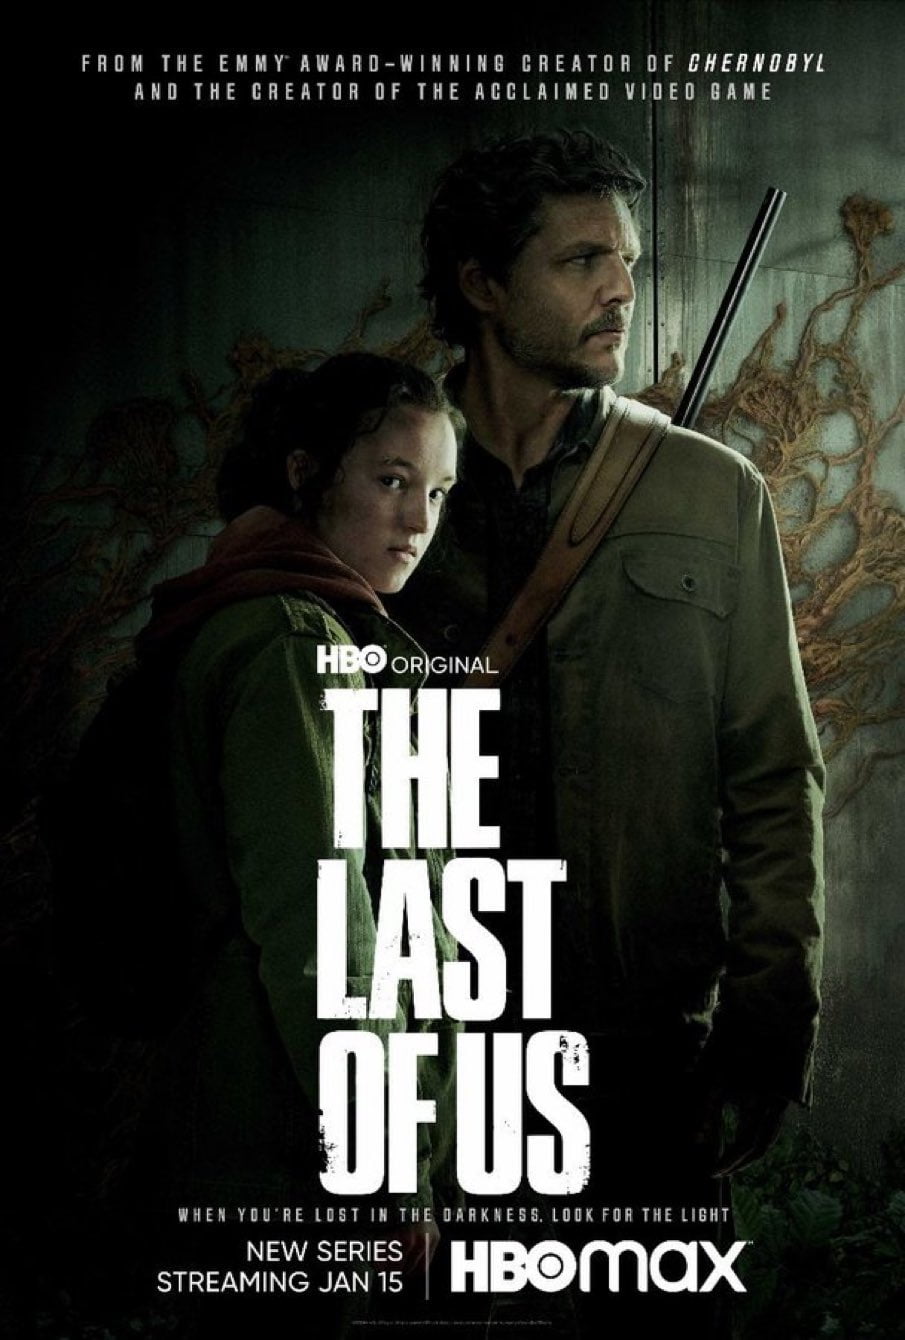 ‘The Last of Us’ releases a new official poster